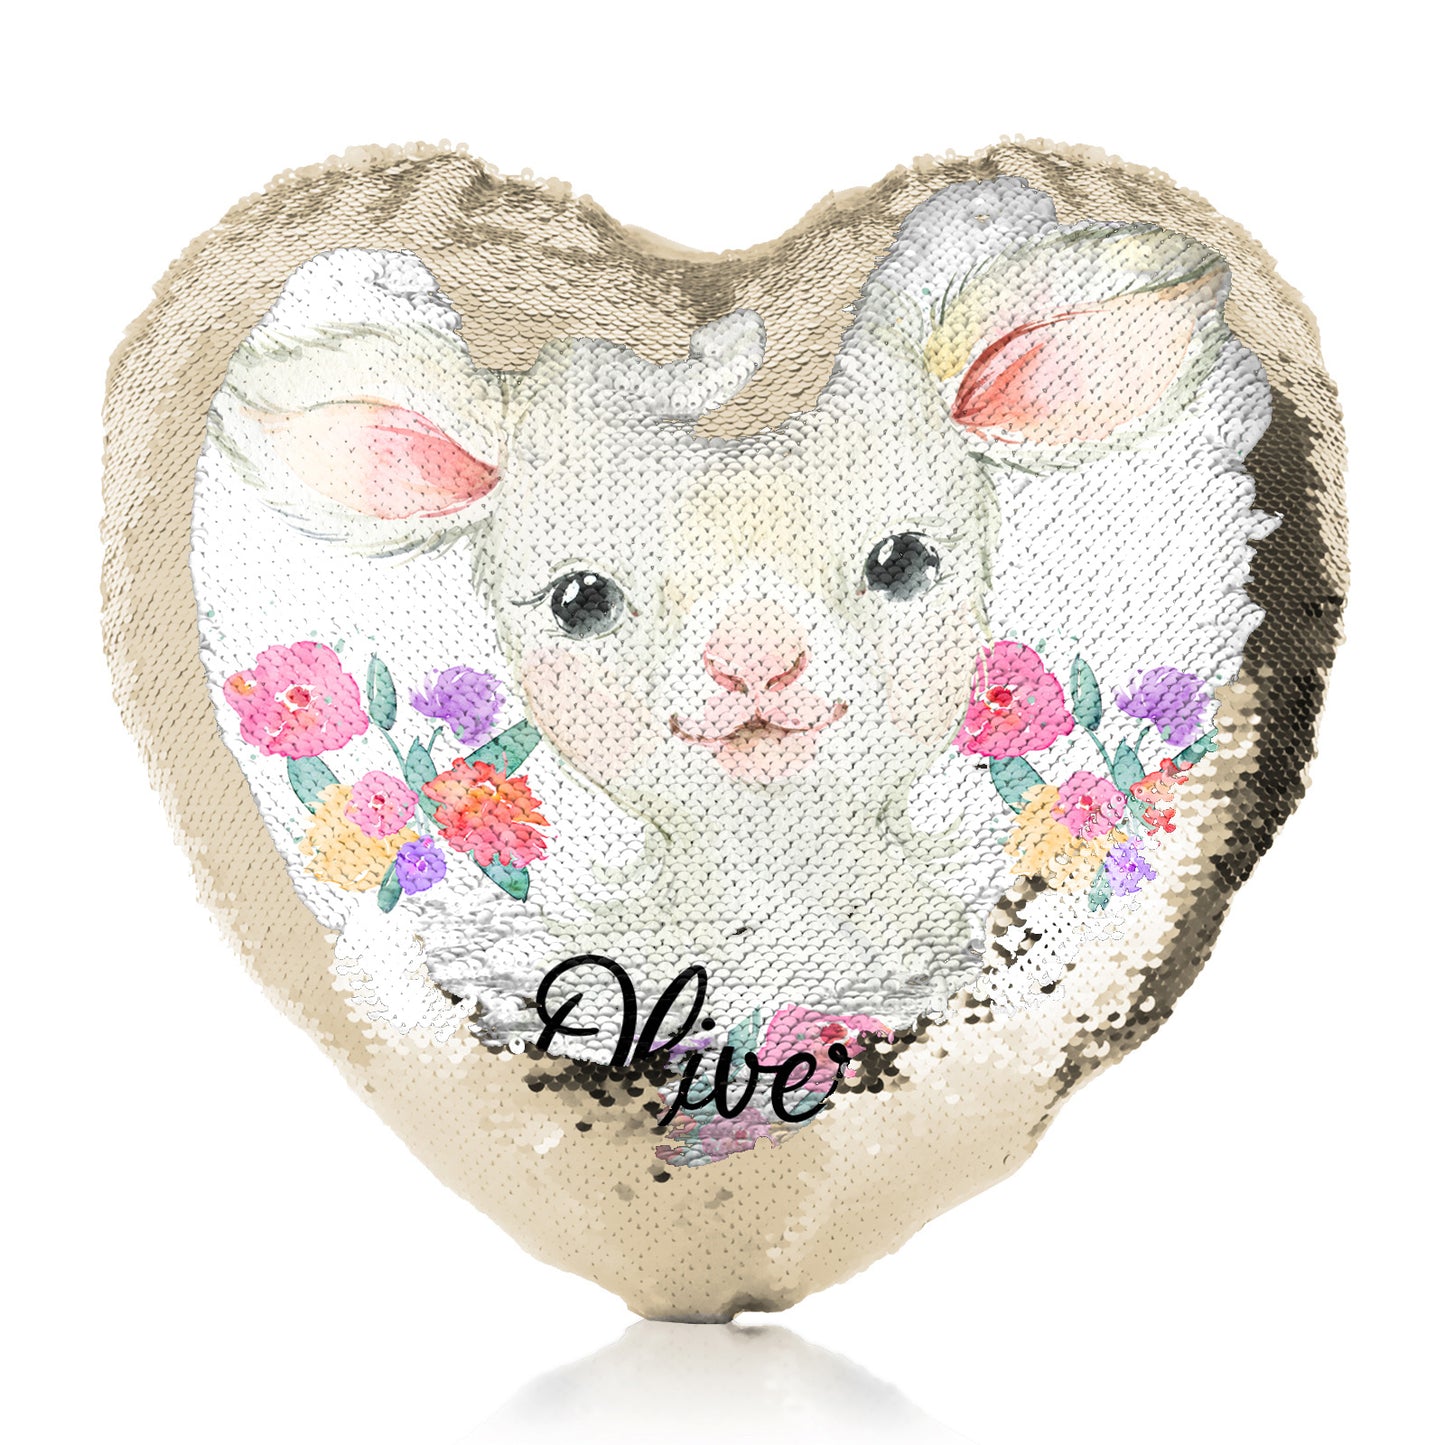 Personalised Sequin Heart Cushion with White Lamb Flowers and Cute Text